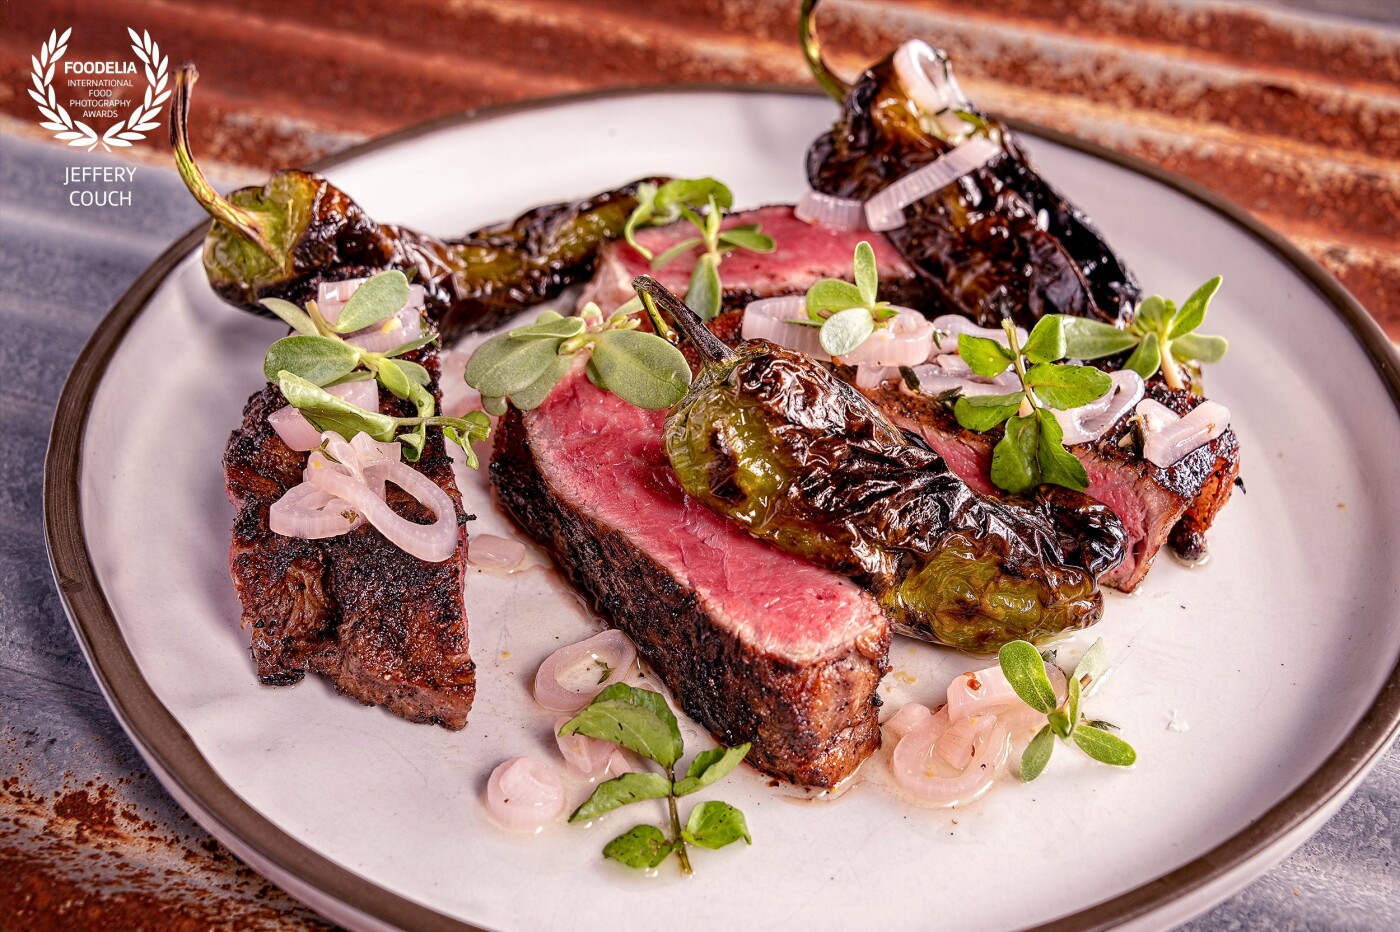 Photo shoot for two-star Michelin Chef Josiah Citrin was used in a promotional presentation of the new Openaire restaurant in Los Angeles. Coffee crusted dry aged NY strip loin, pickled onions, fresh oregano, and charcoal roasted shishito peppers. <br />
@josiahcitrin<br />
@jeffcouchfood